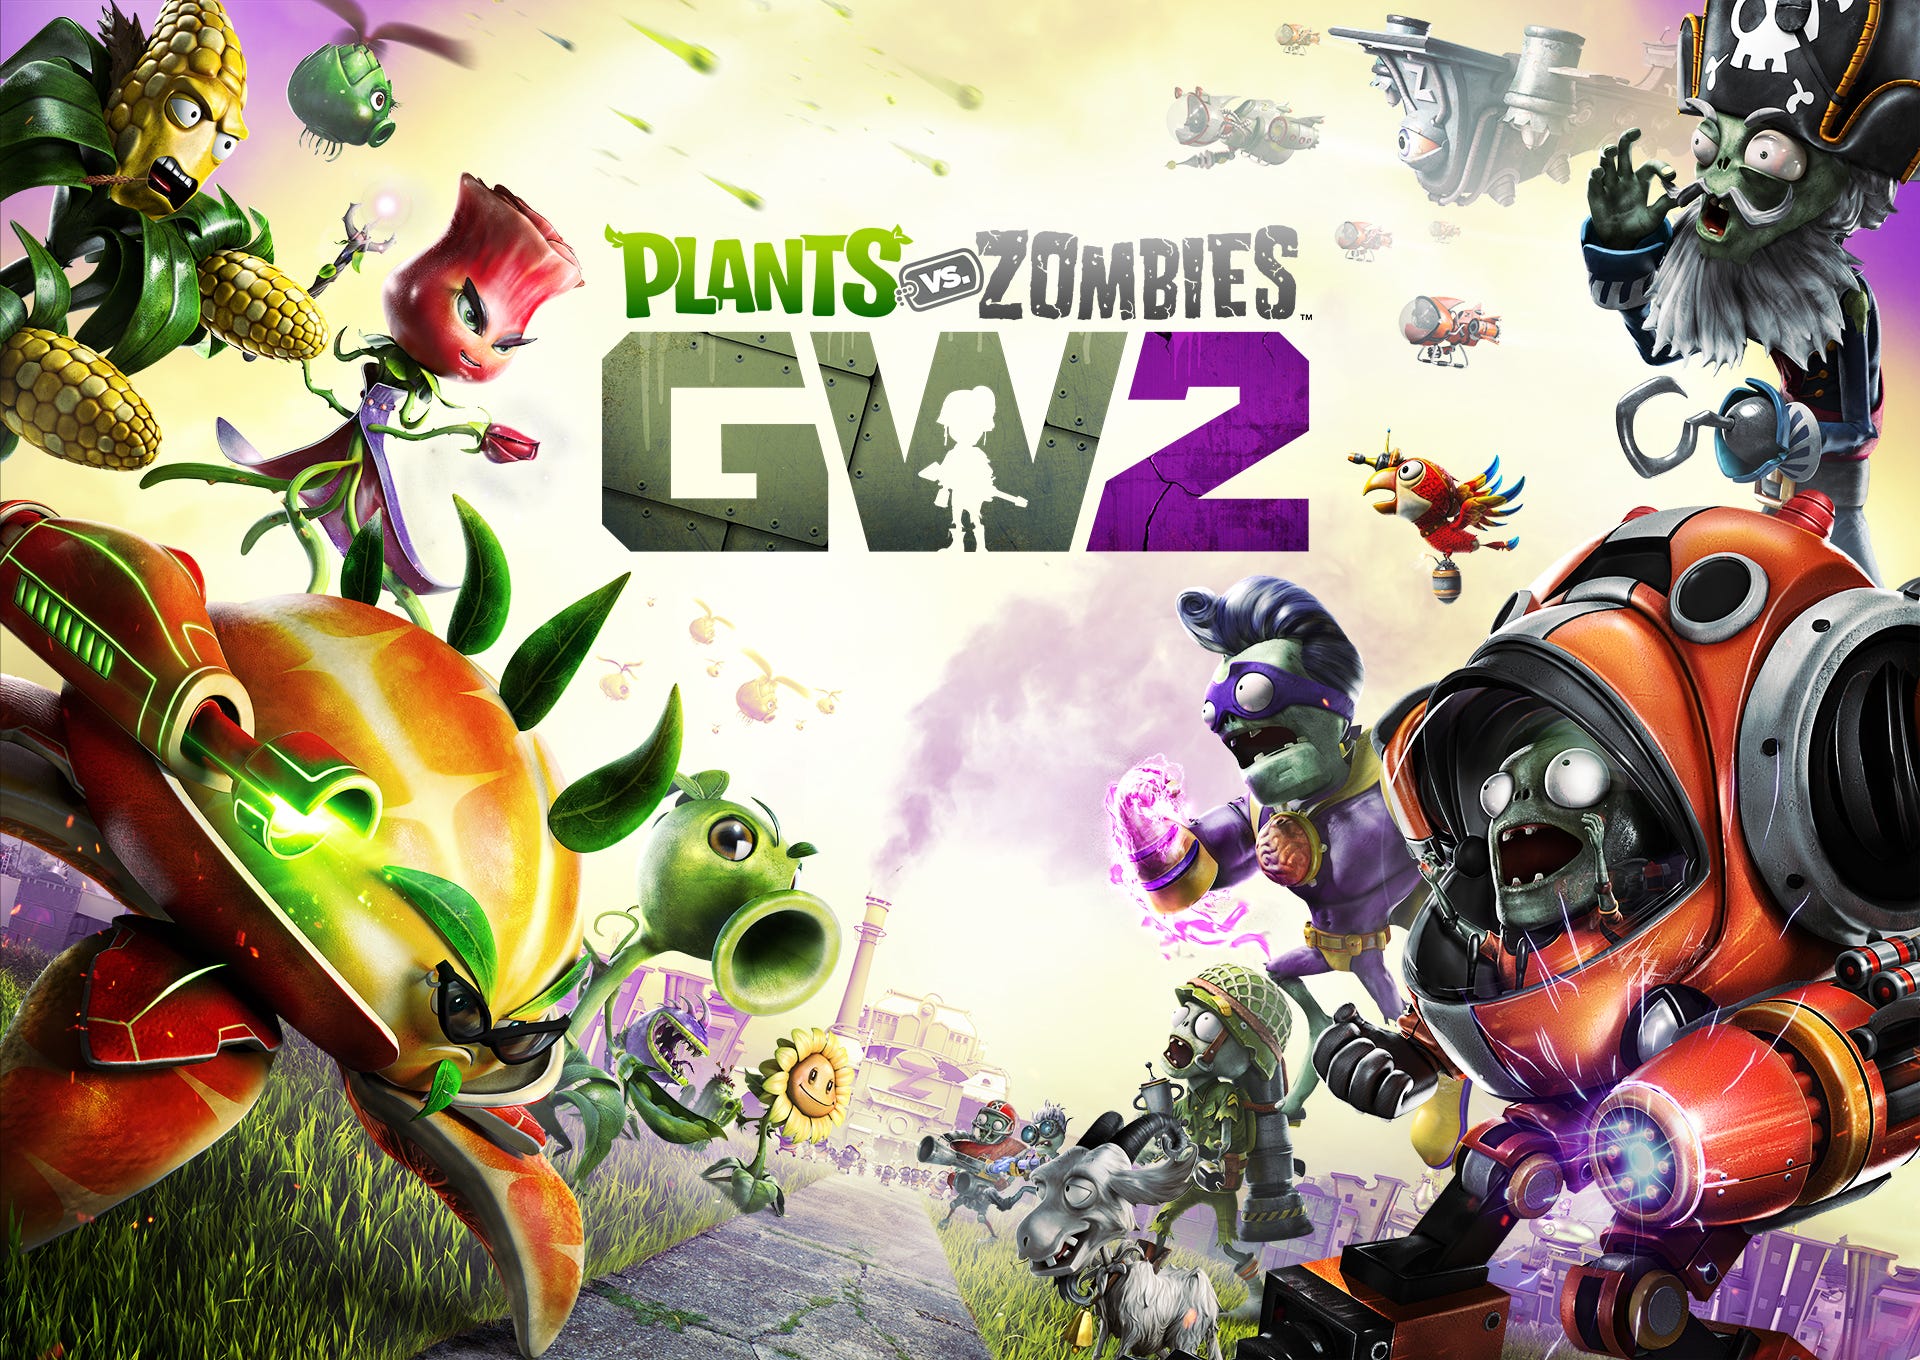 Plants vs Zombies: Garden Warfare 2: Best Ways to Earn Coins and